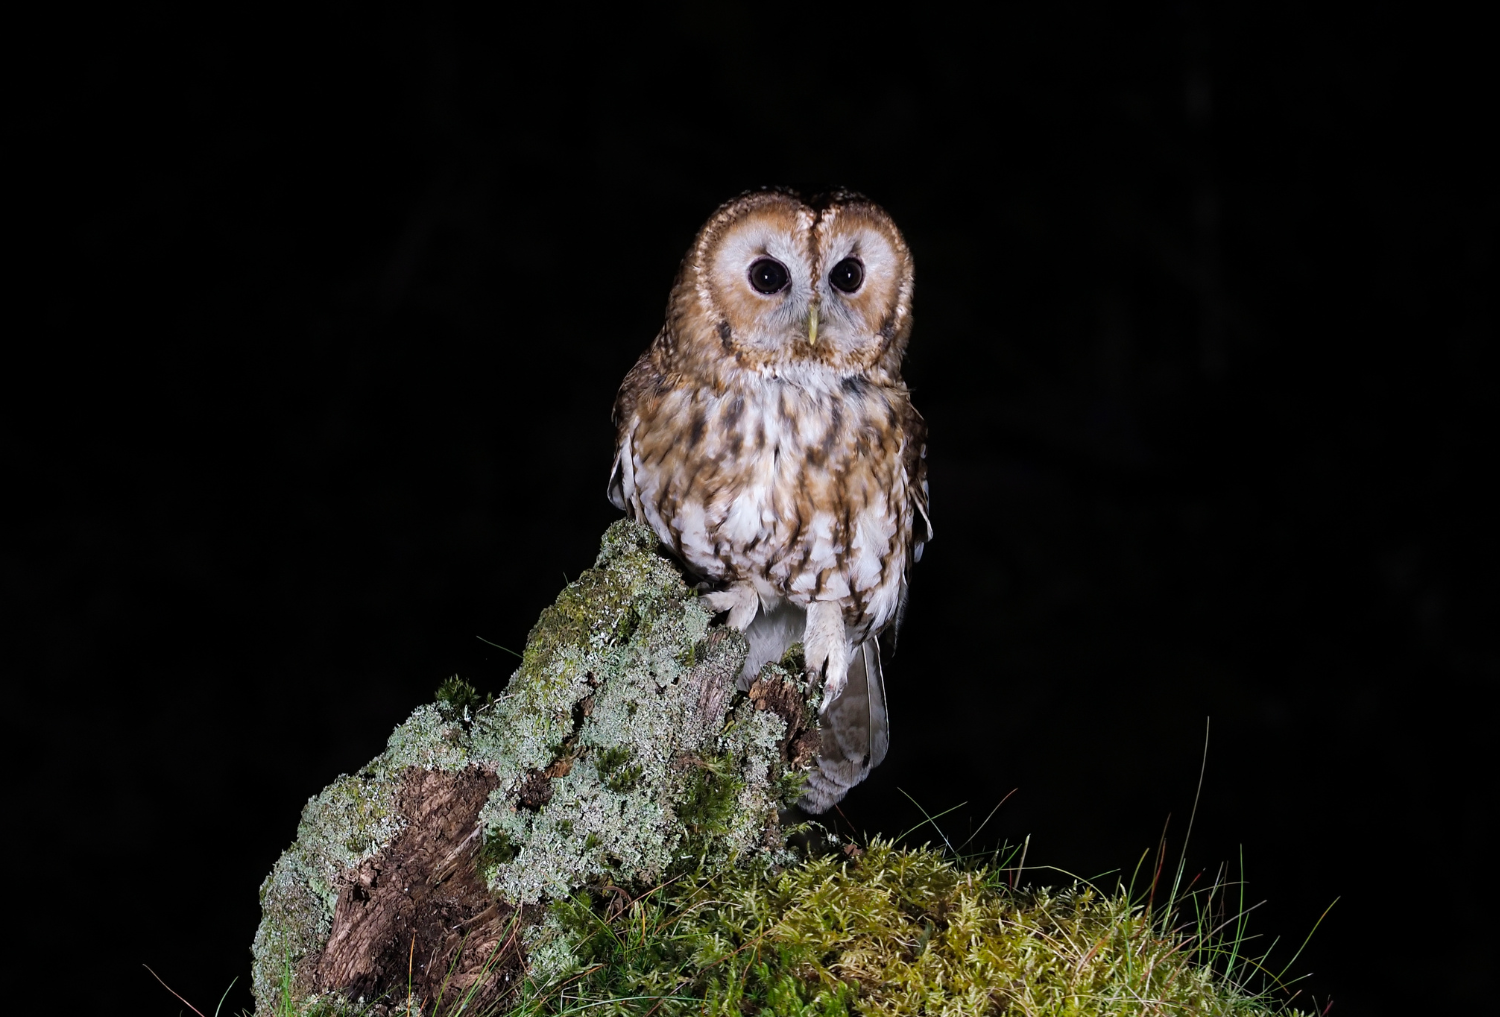 A tawny owl perching on a mossy and lichen covered log.